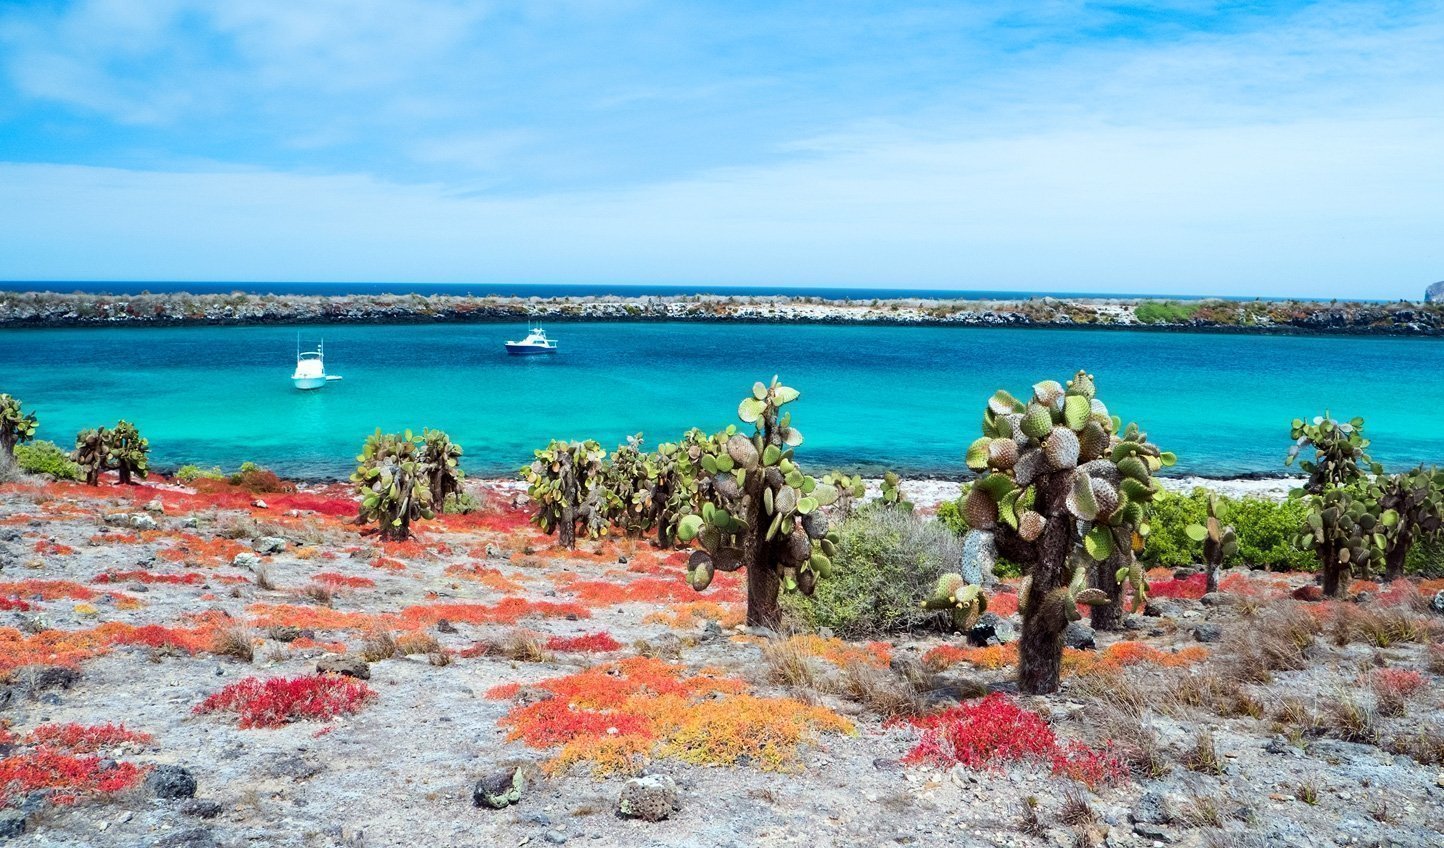 Famous Galapagos Islands - is the thing you must see in Ecuador!